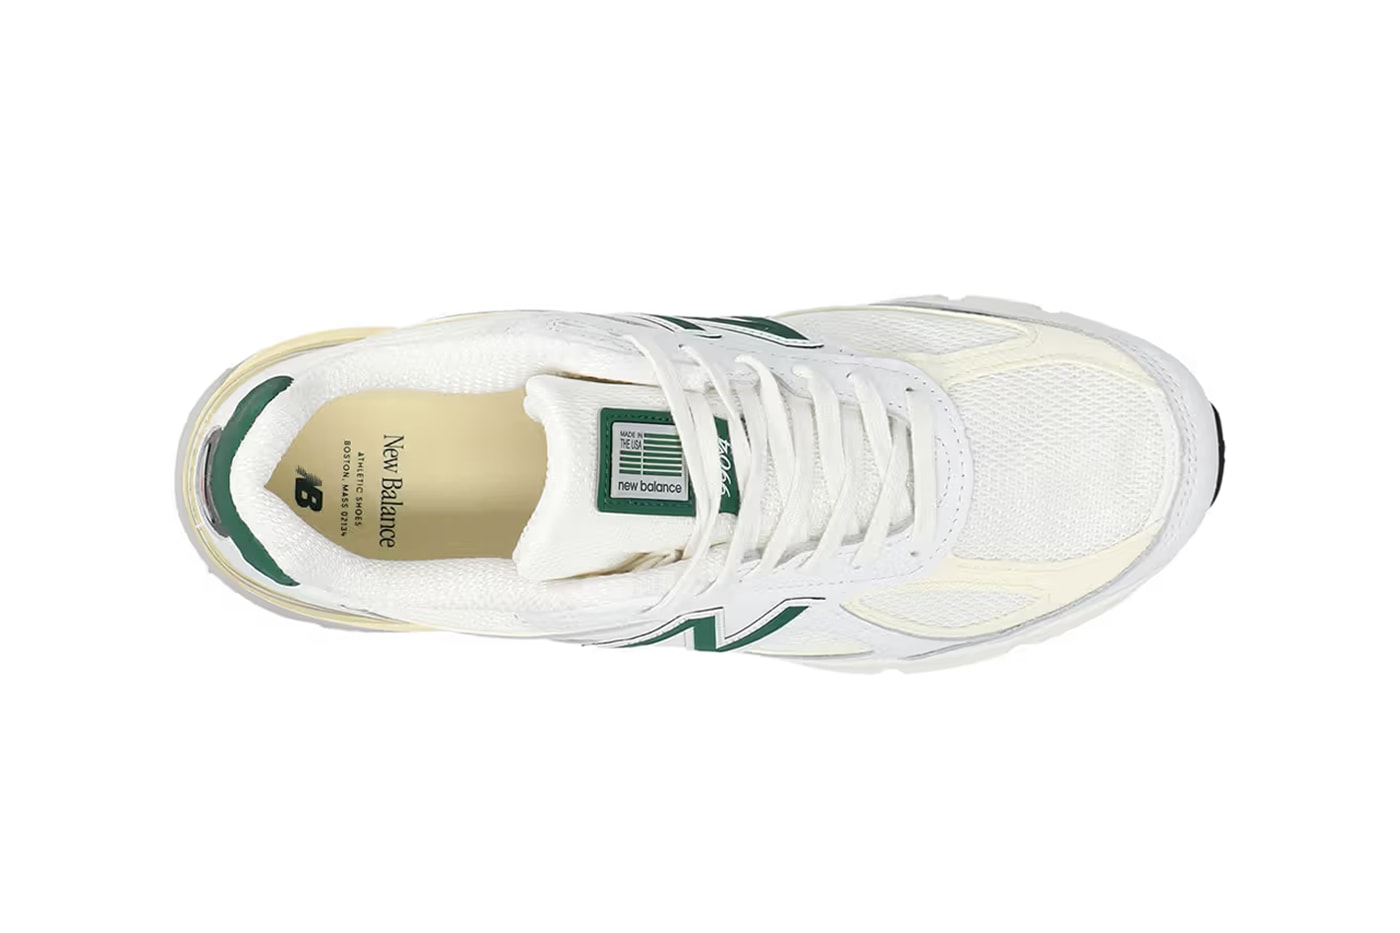 New Balance 990v4 White Green U990TC4 Release Date Info Store list buying guide photos price 